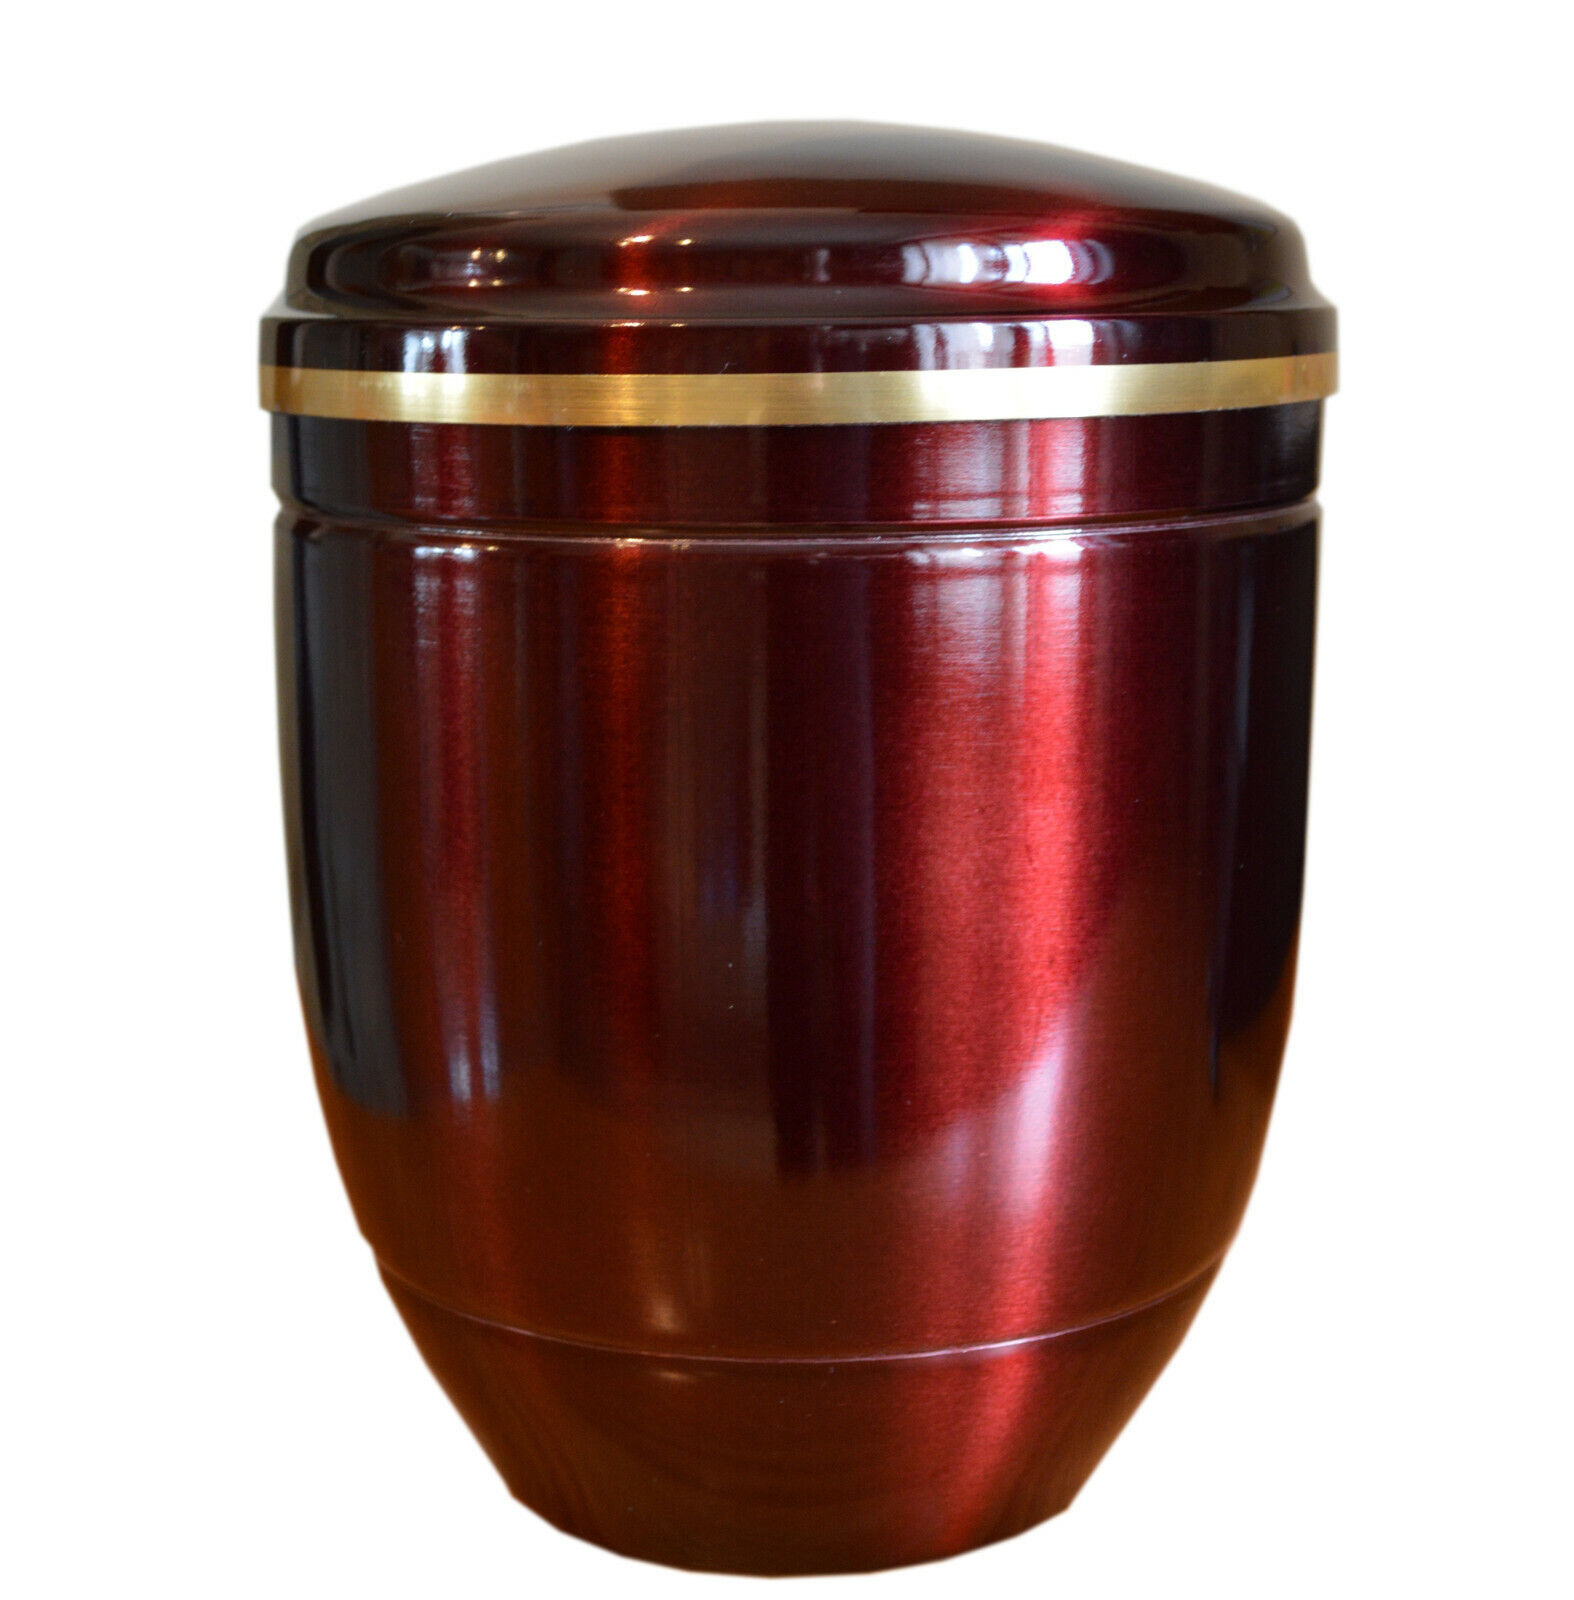 Primary image for Aluminum Cremation Urn for Ashes Adult  Funeral Urn Memorial Pet cremation Urn